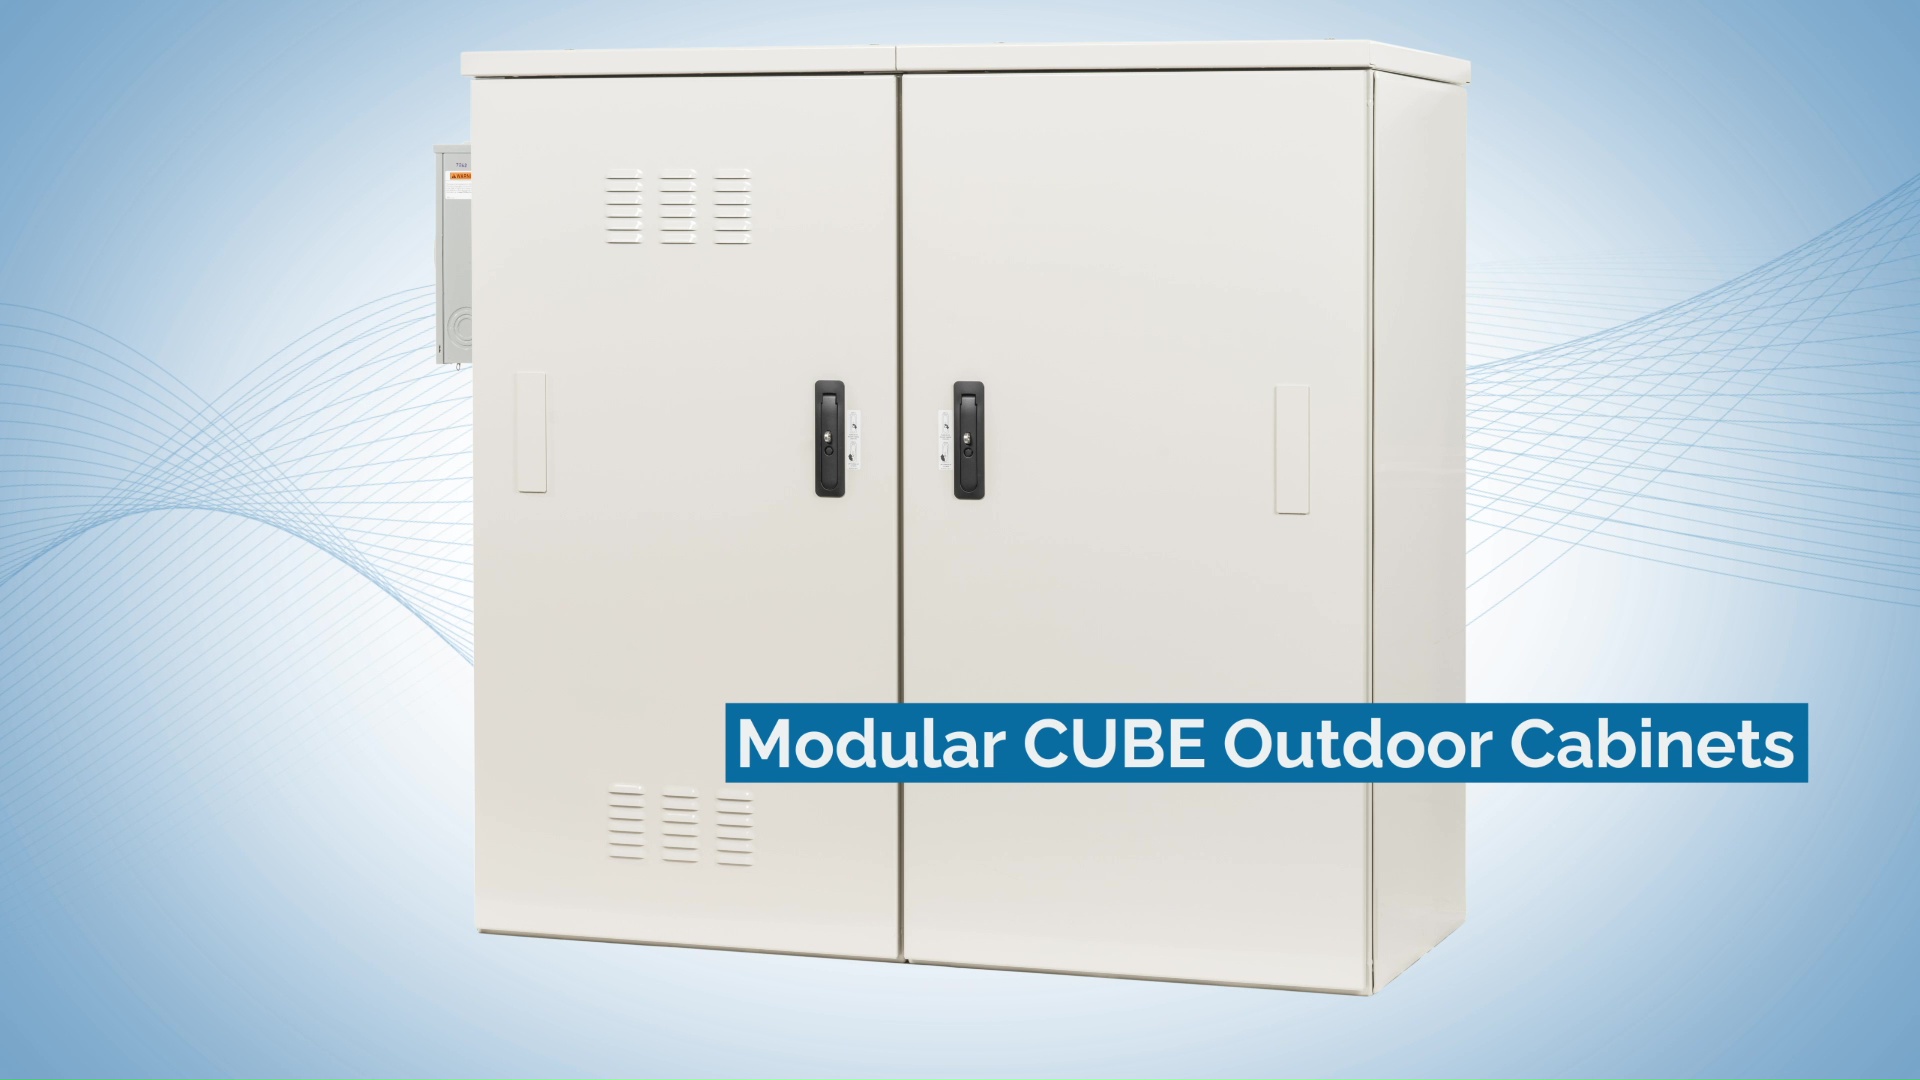 Modular CUBE Outdoor Cabinets